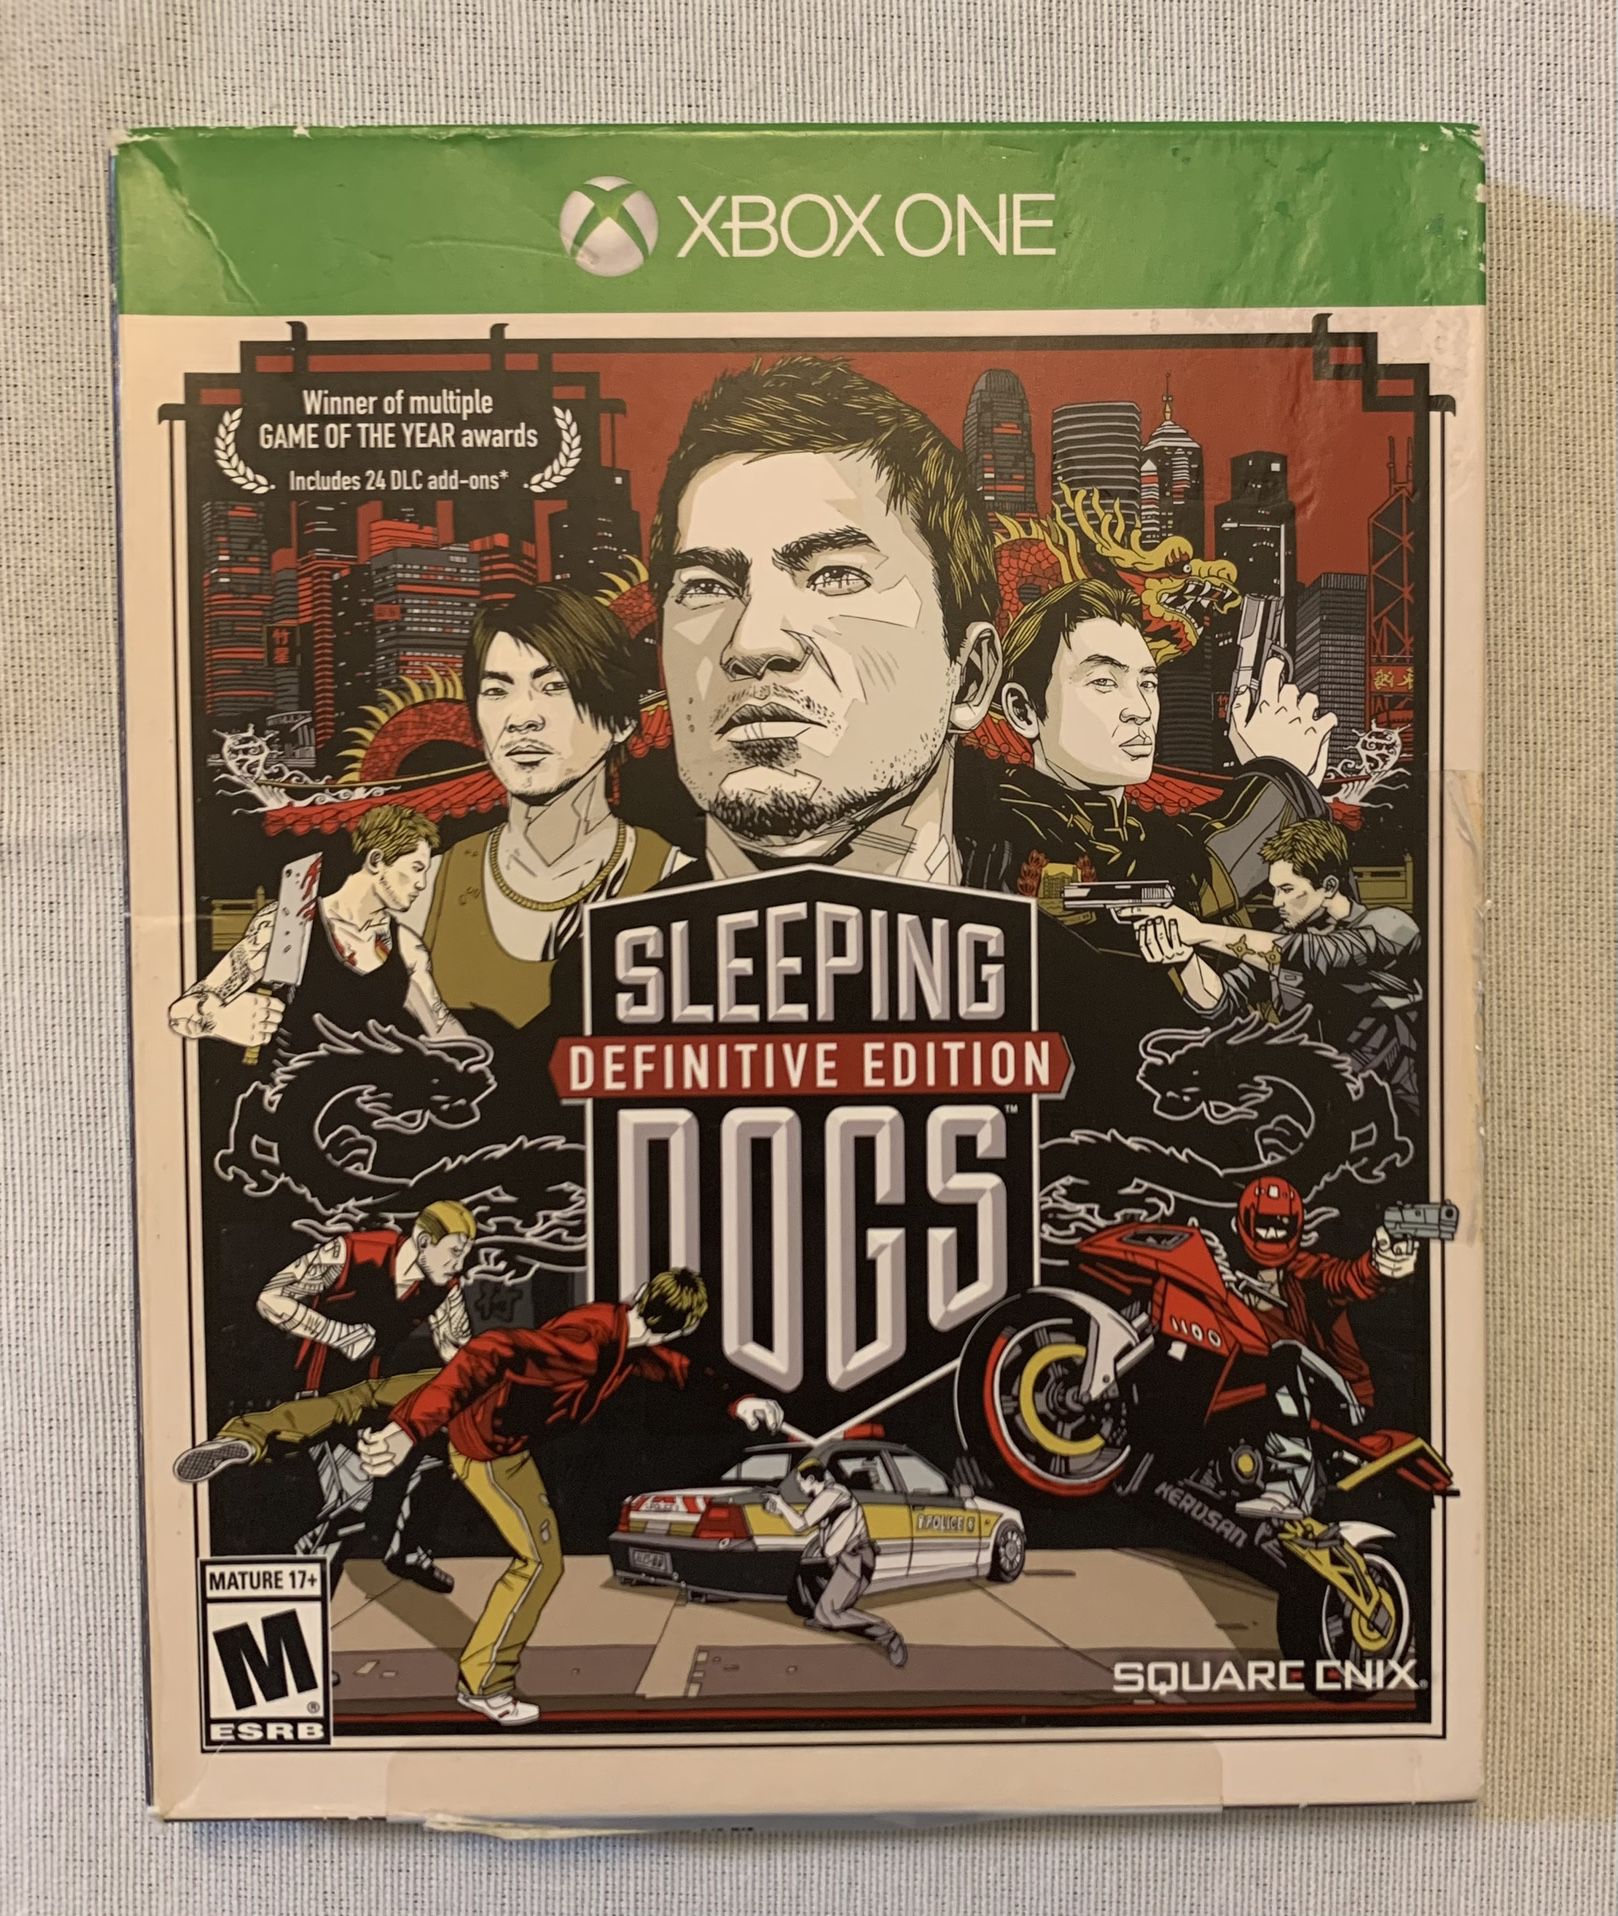 Sleeping Dogs Definitive Edition [ Limited Edition Art Book ] (XBOX ONE)